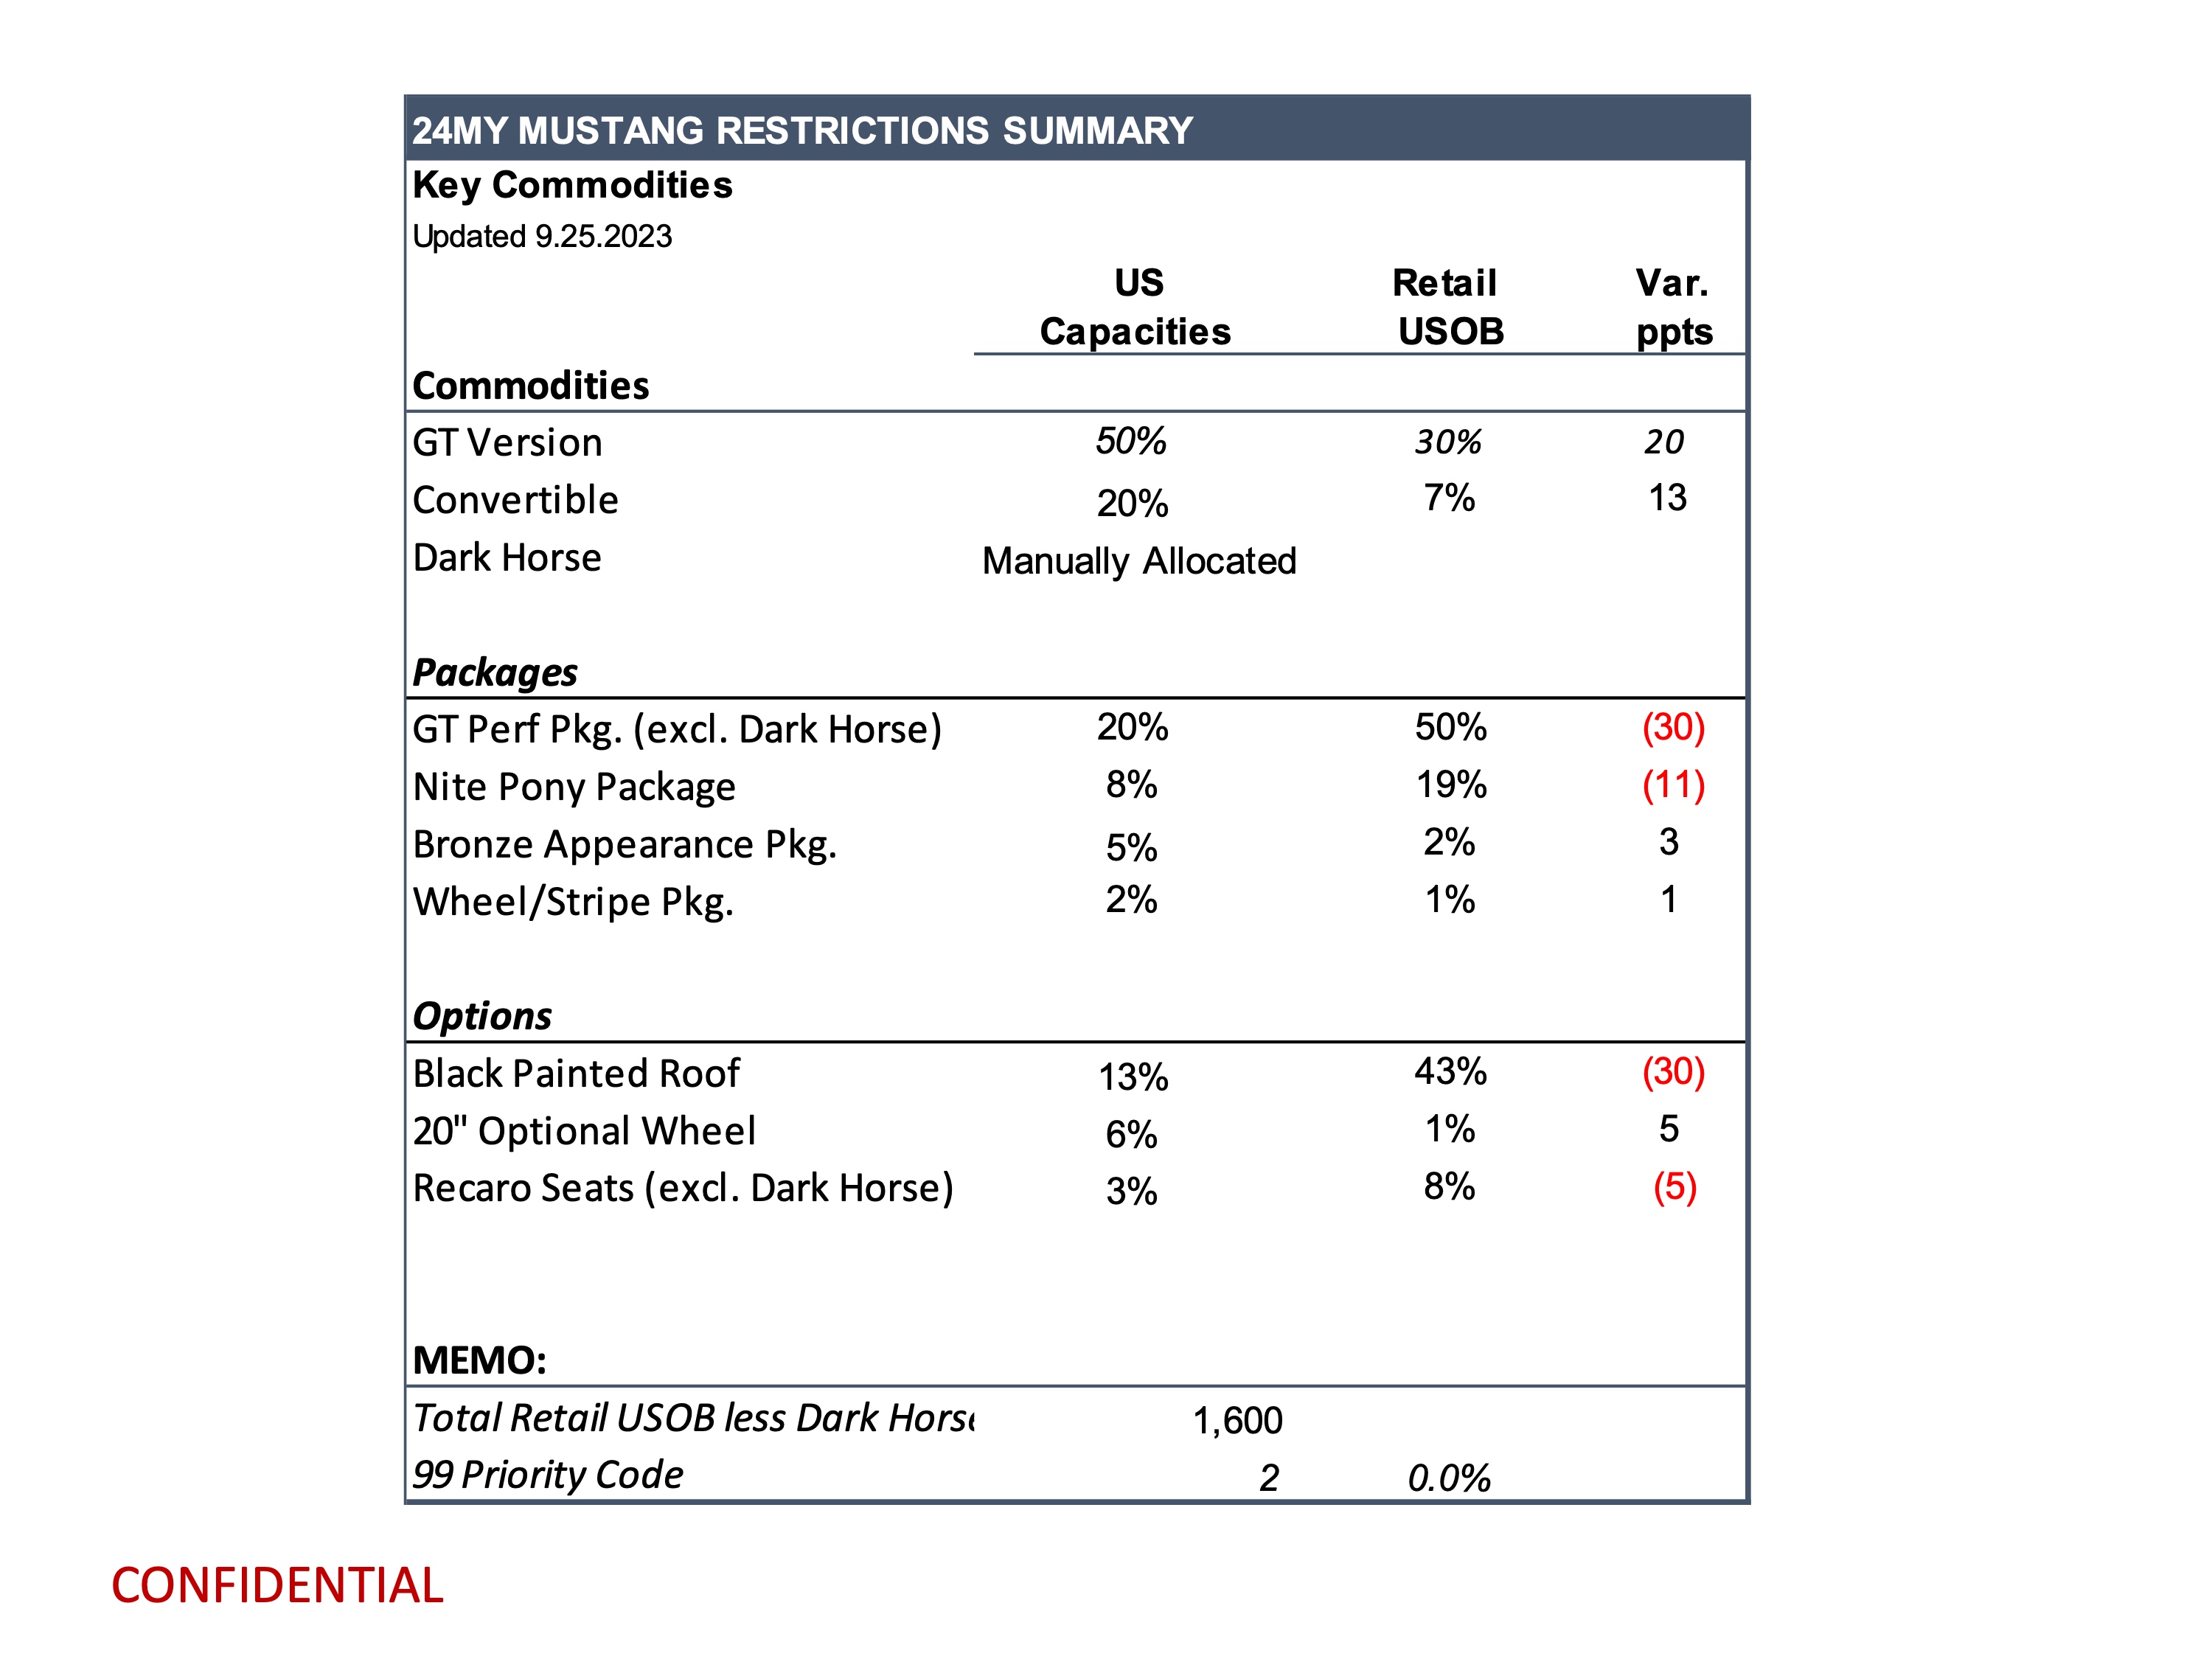 S650 Mustang Latest Mustang Production Key Commodity Constraints + Total Retail Unscheduled Orders (9/25/23) page 3